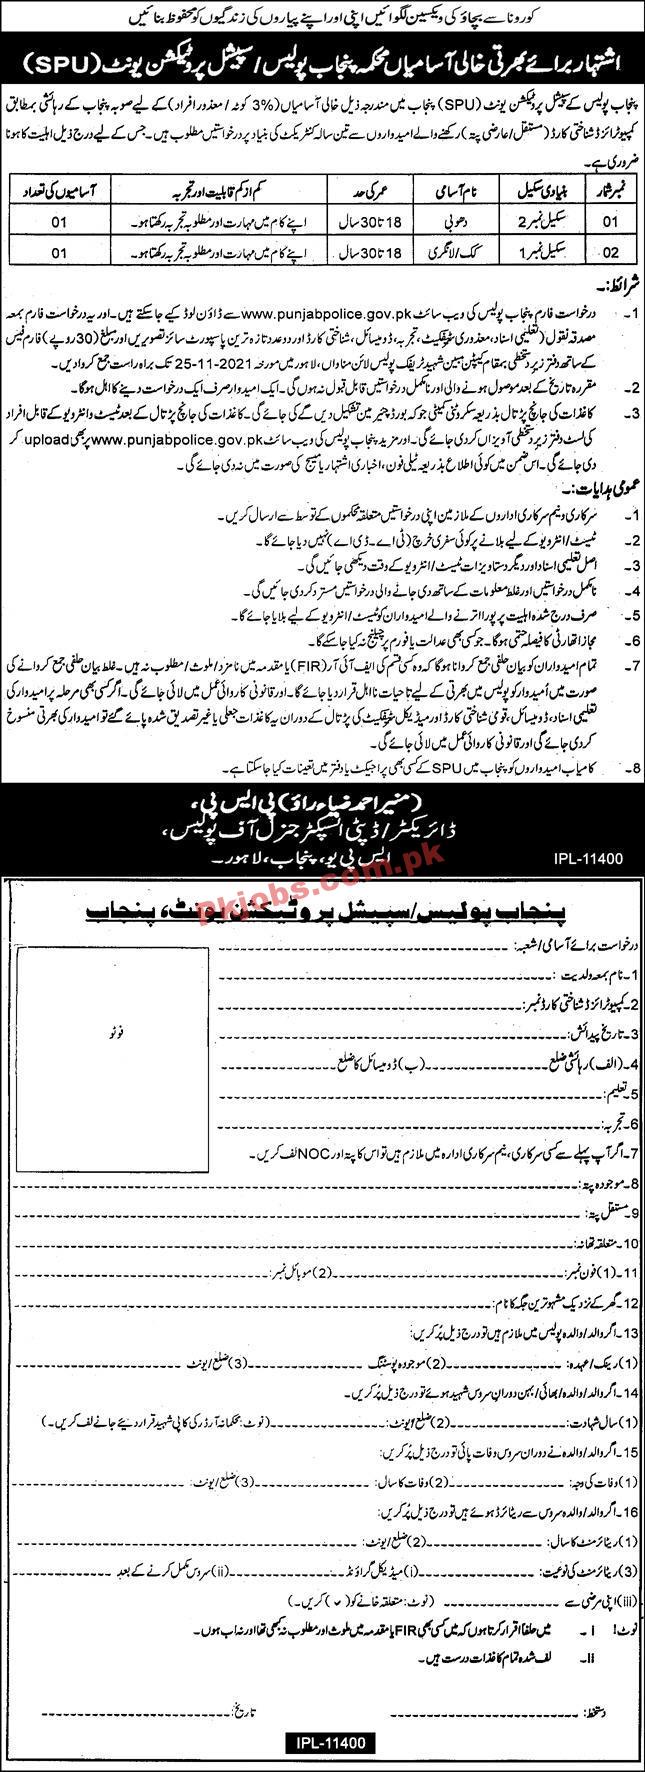 Punjab Police PK Jobs 2021 | Punjab Police Special Protection Unit Announced Latest Advertisement PK Jobs 2021